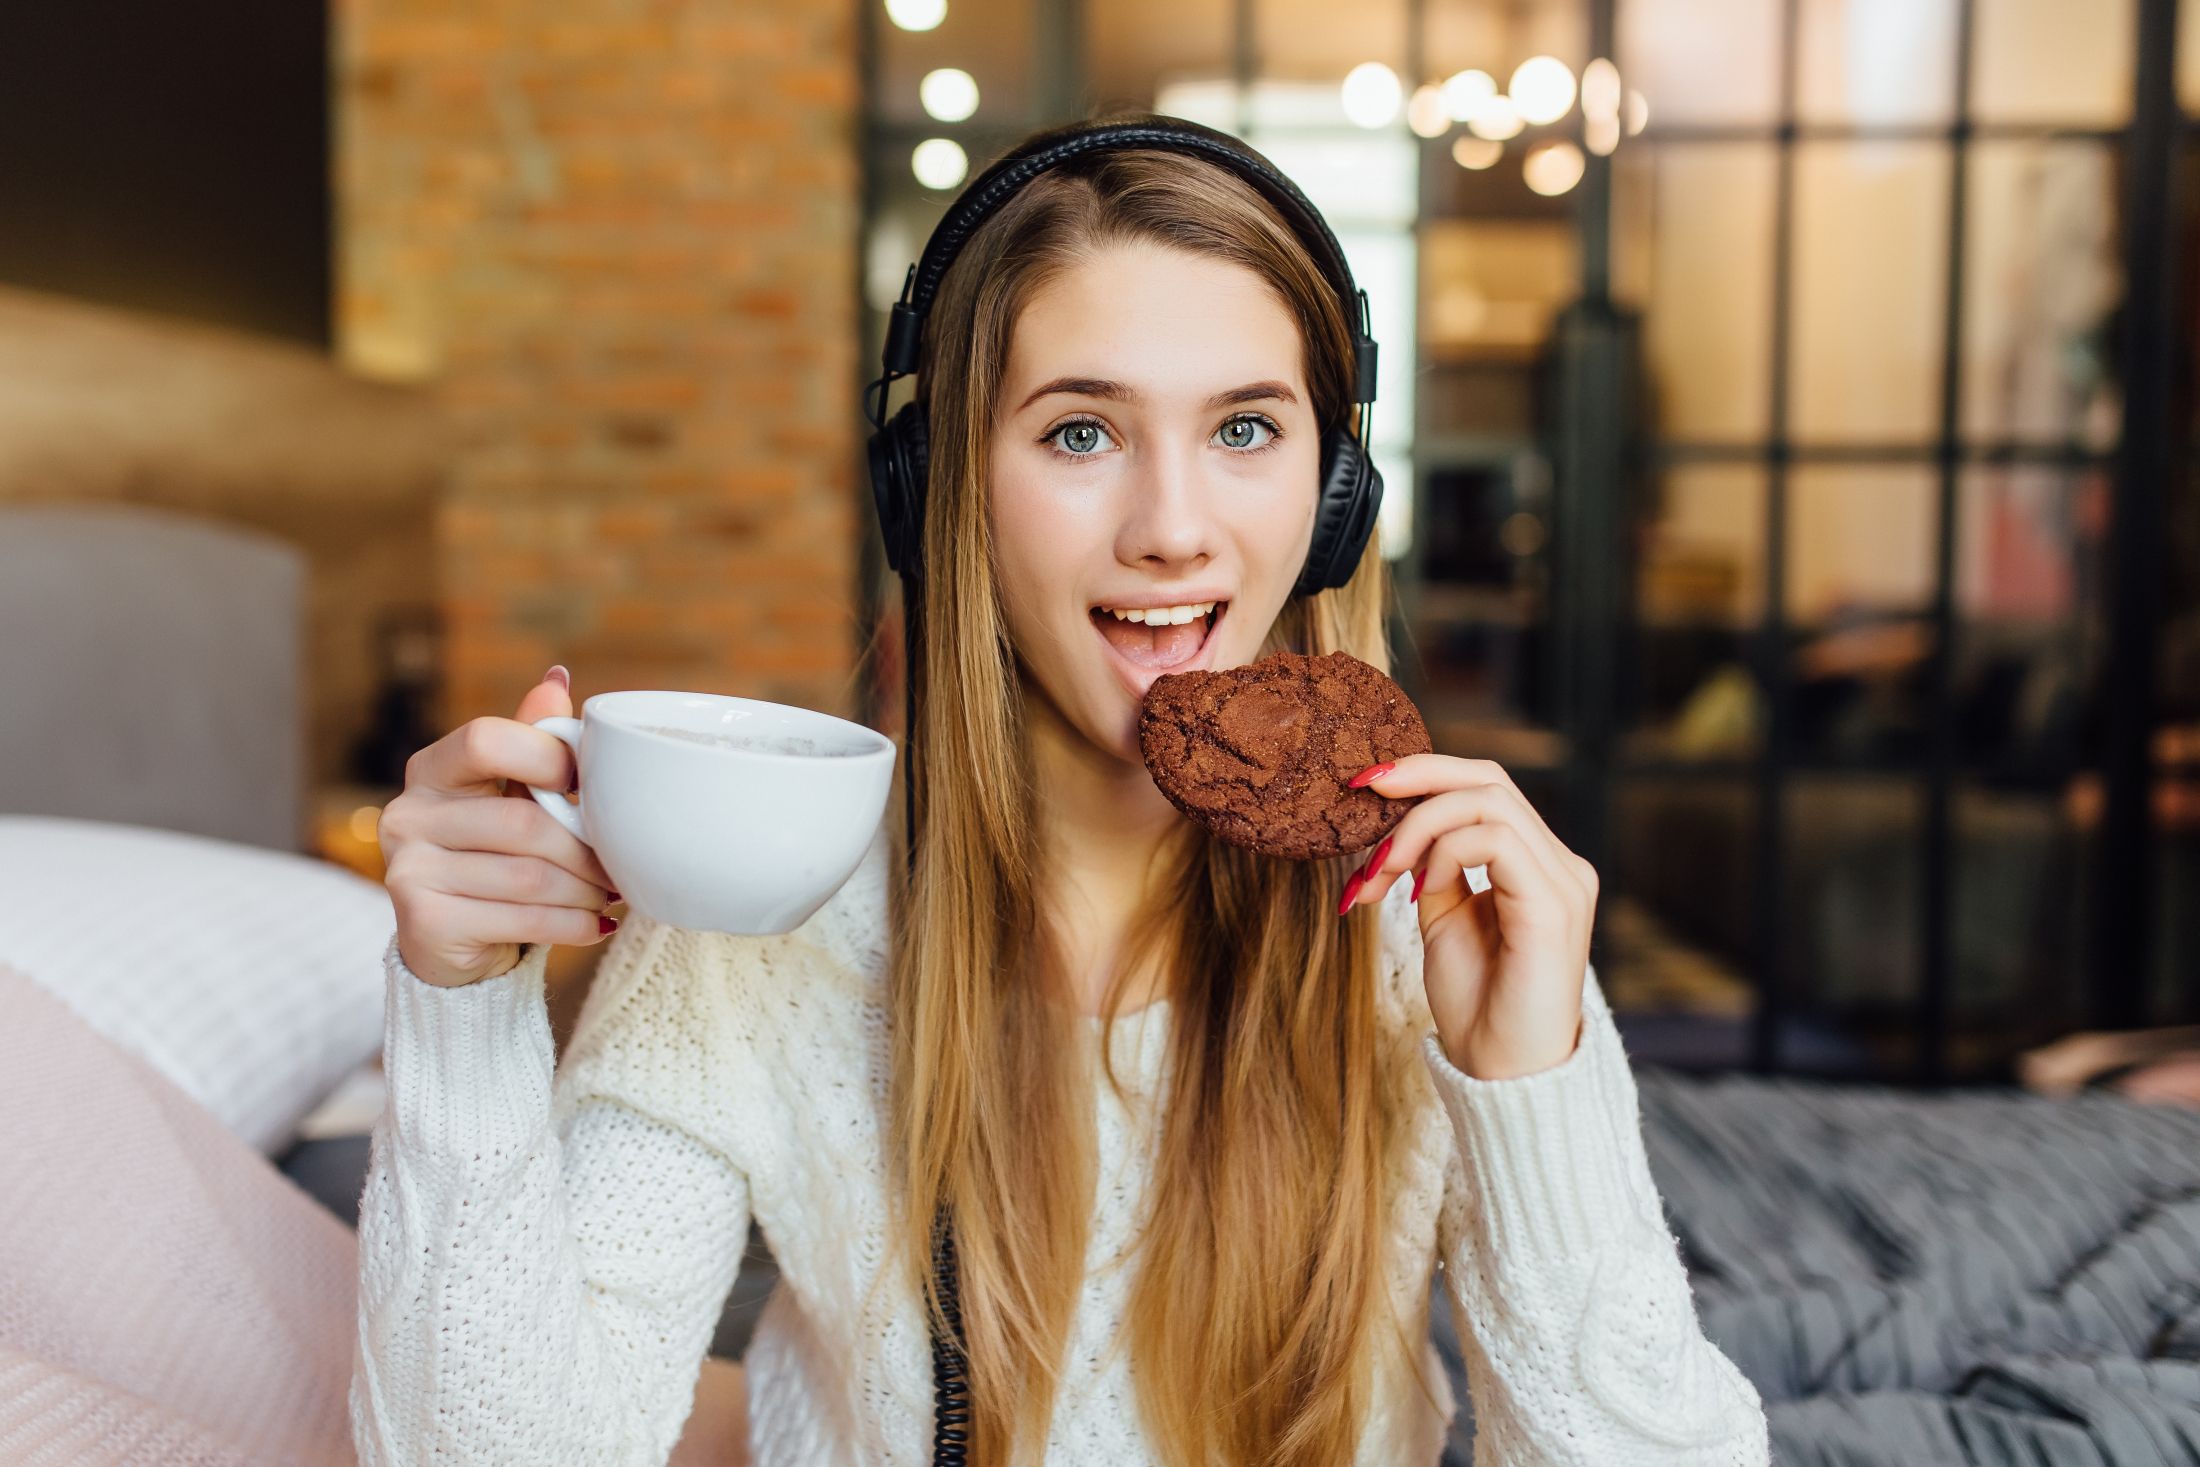 woman-smiles-while-eating-cake-drinking-coffee-and-wearing-headphone-that-connect-to-tablet-gadget.jpg